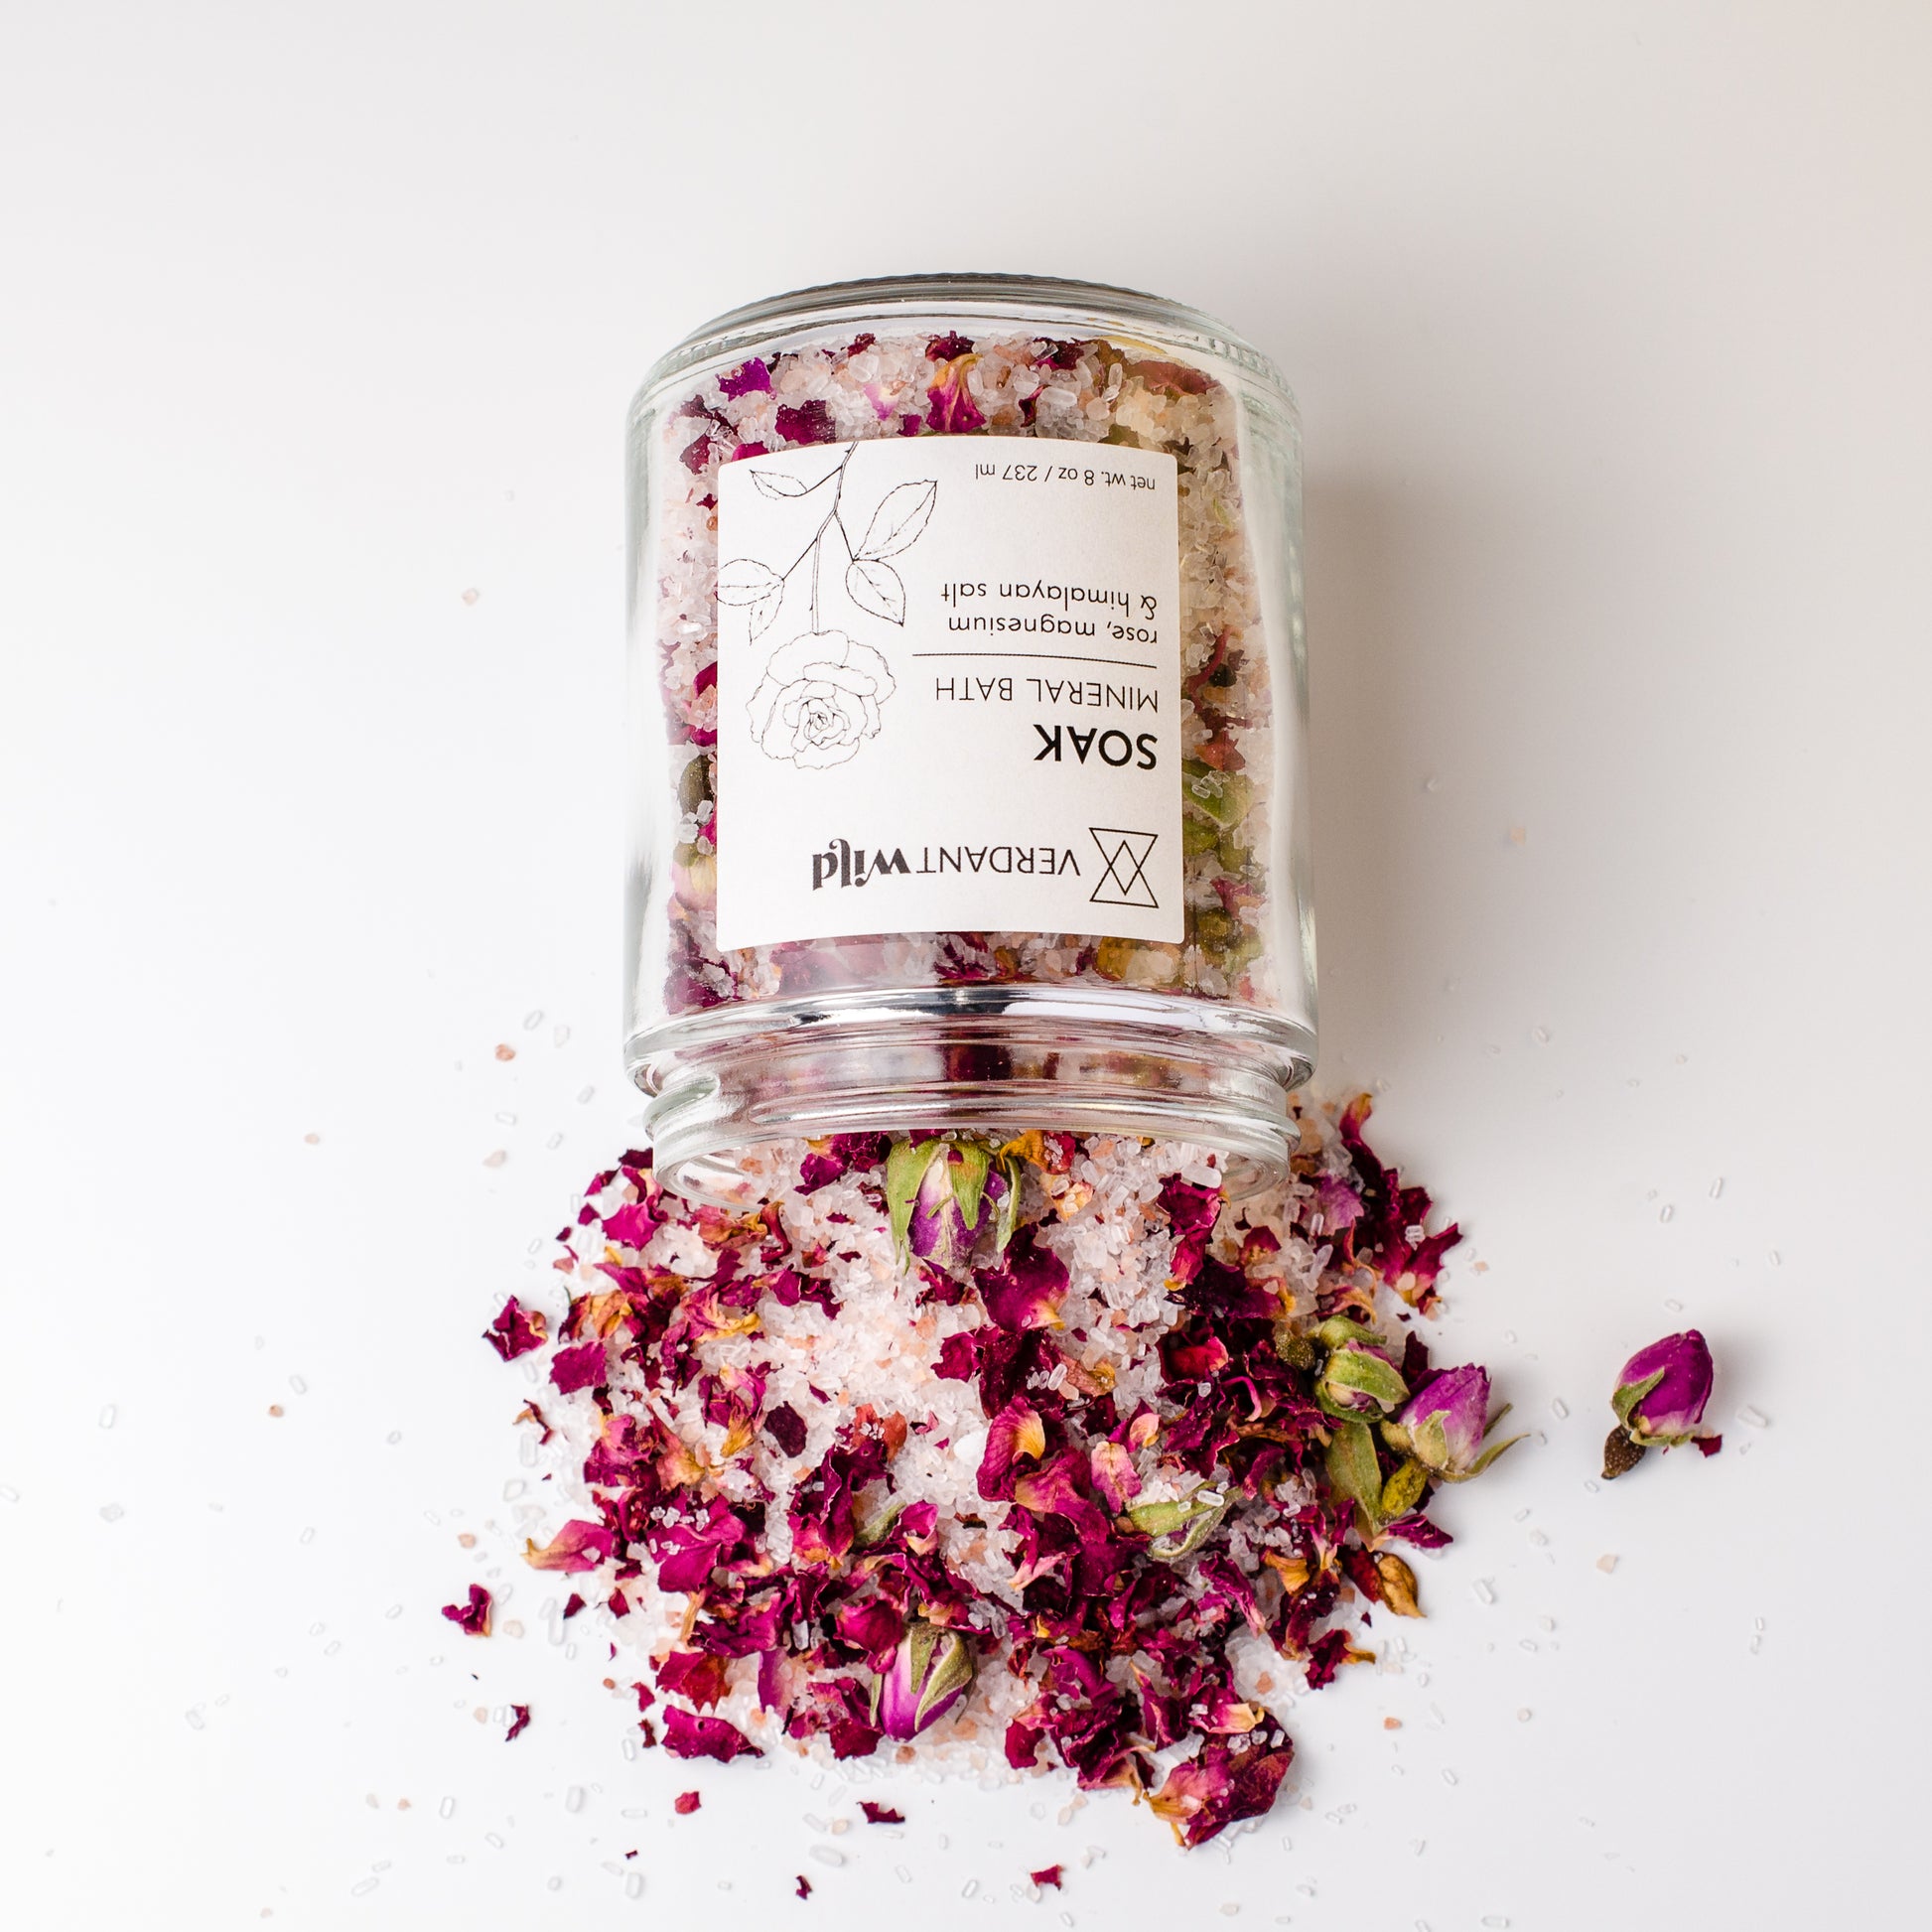 rose, epsom and himalayan bath salts open and spilled out to show texture